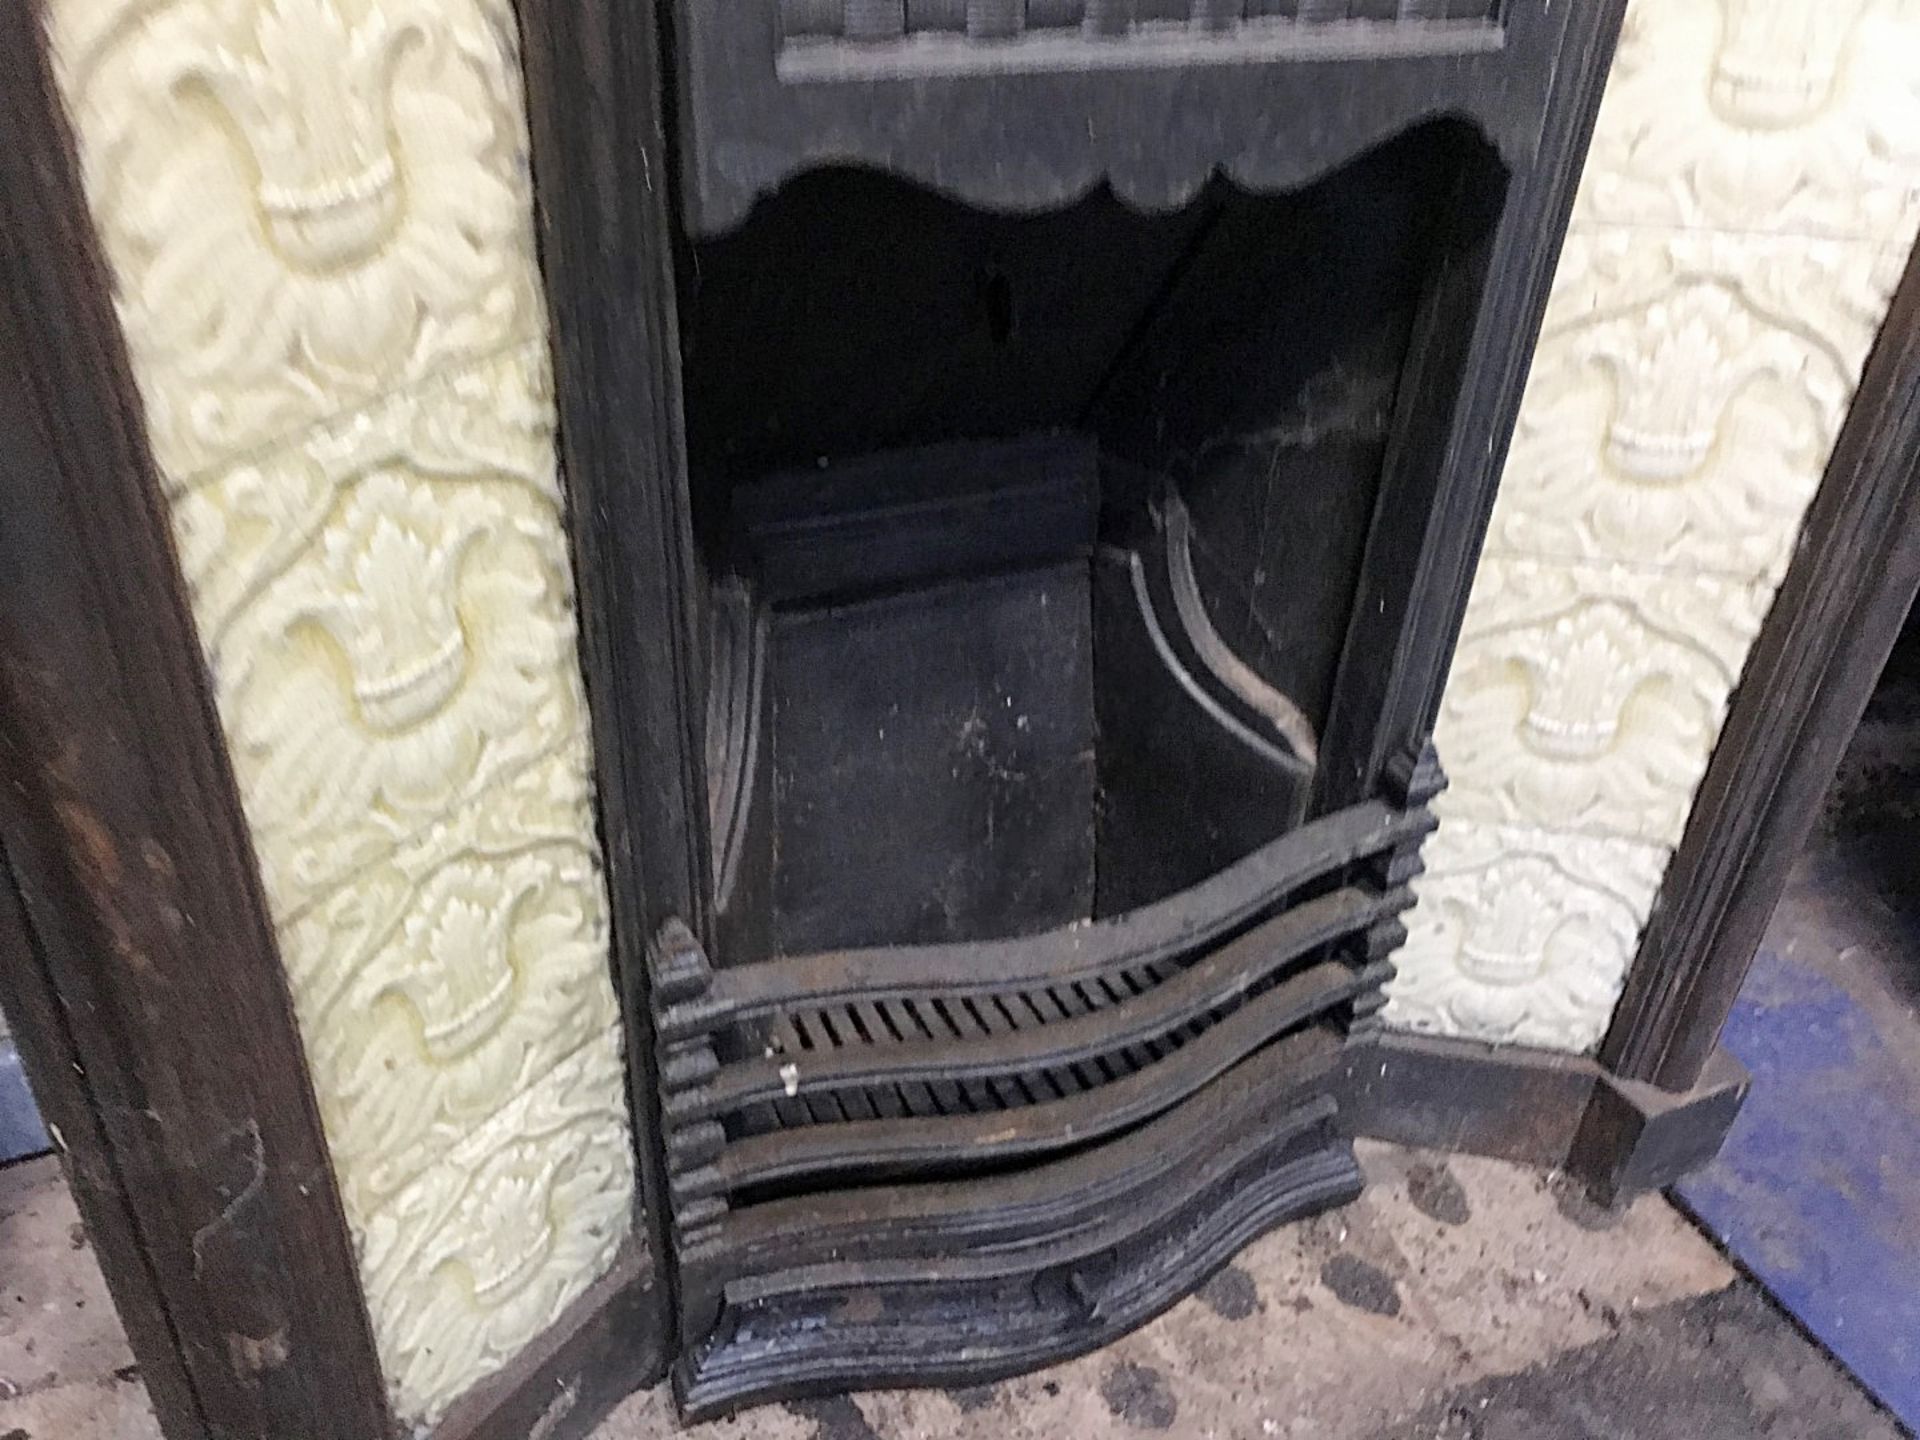 1 x Stunning Antique Victorian Cast Iron Fire Surround With Ornate Insert And Tiled Sides - - Image 5 of 8